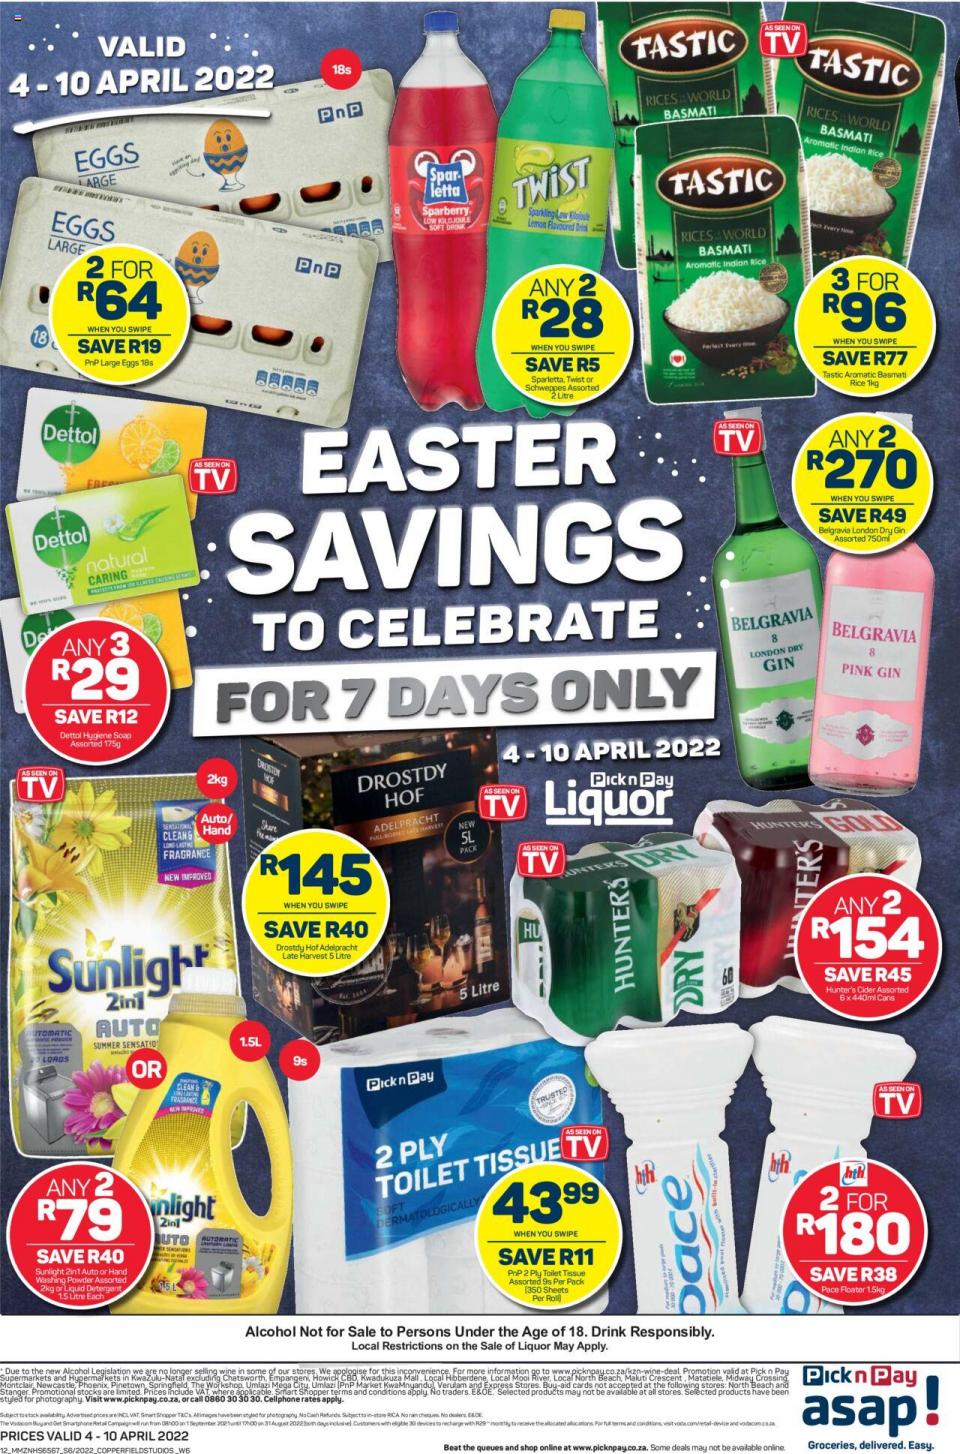 Pick n Pay Specials Easter Savings 4 – 10 April 2022